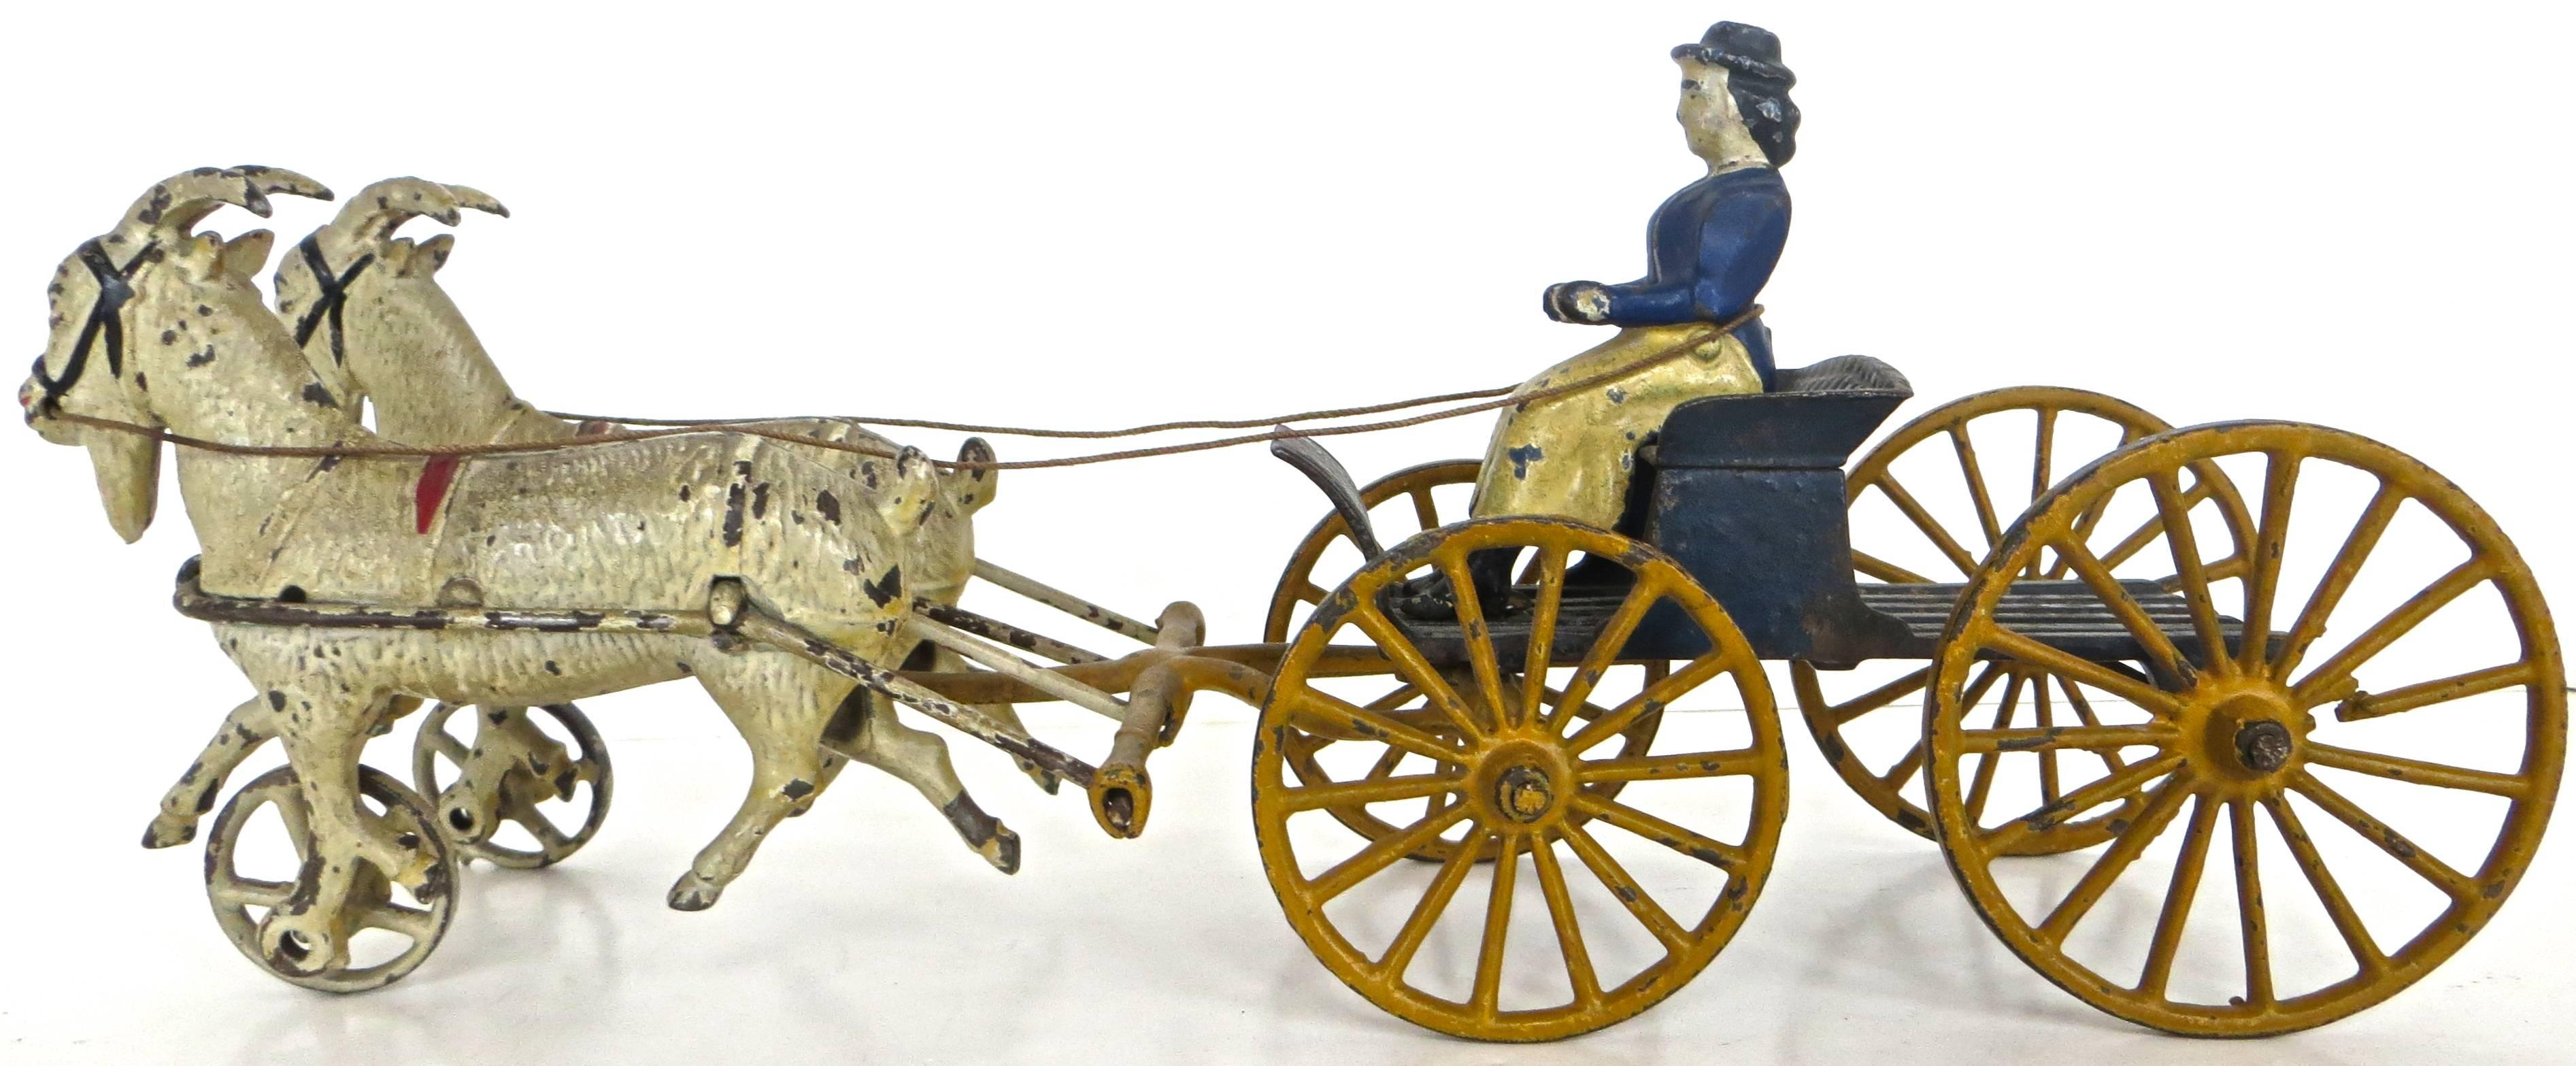 Cast iron turn of the century American toy, this rare and hard to find version with a double goat drawn buckboard and lady driver, was manufactured by the Harris Toy Company, Toledo, Ohio, circa 1903. It appears in a catalogue on that date but could